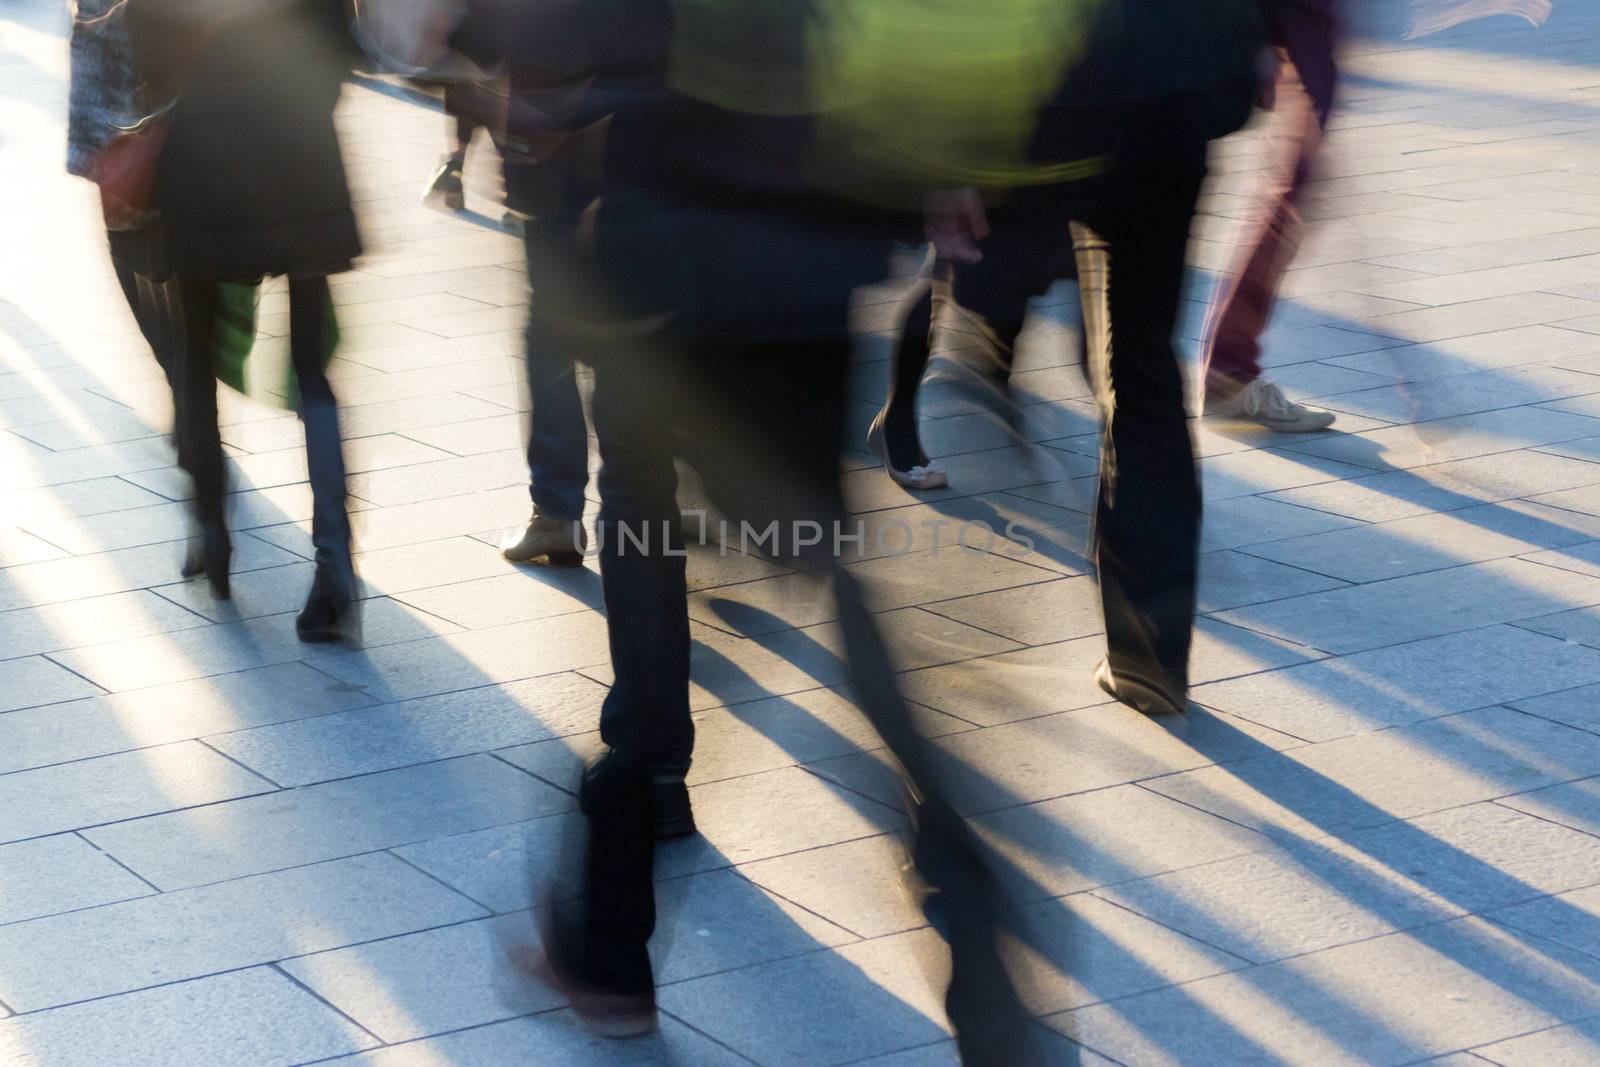 Pedestrians go towards the setting sun, to throw them on the sidewalk long shadows. Frame shot with a long exposure, motion blurred